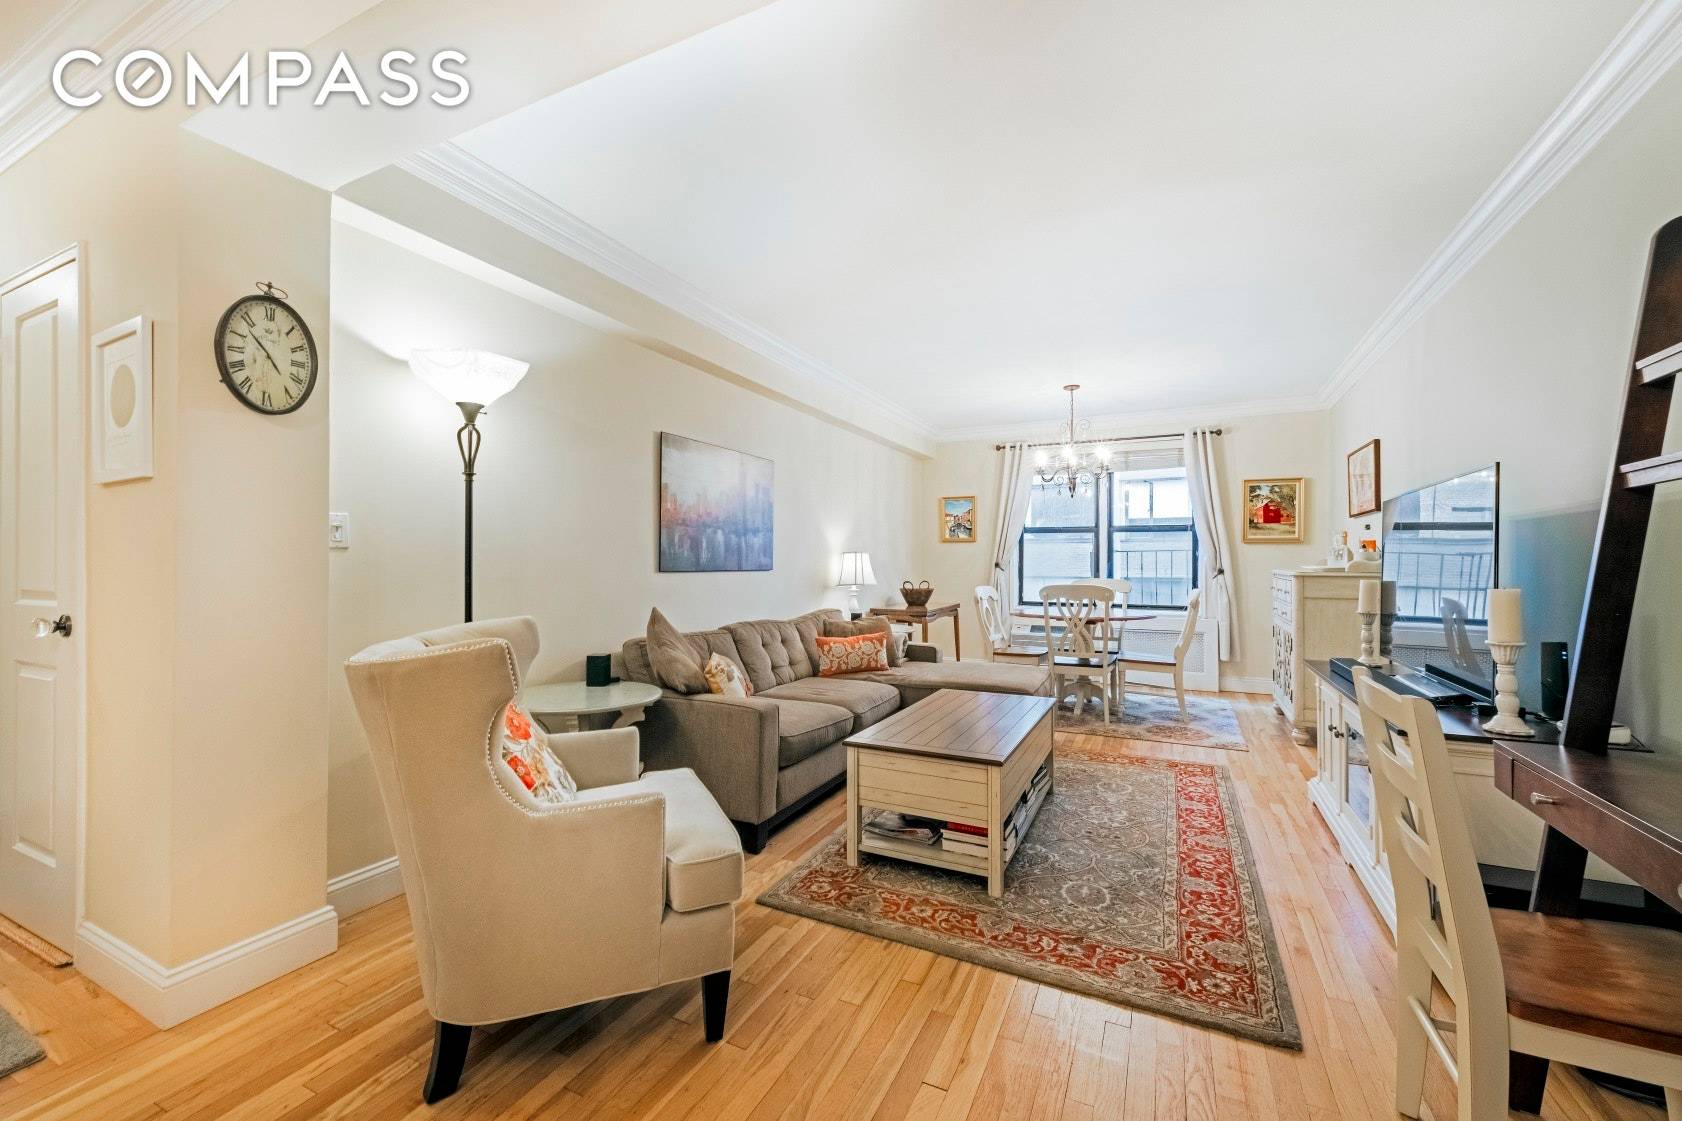 Ultimate value for the price sensitive buyer looking for a spacious one bedroom on East 70th Street in boutique like doorman building.